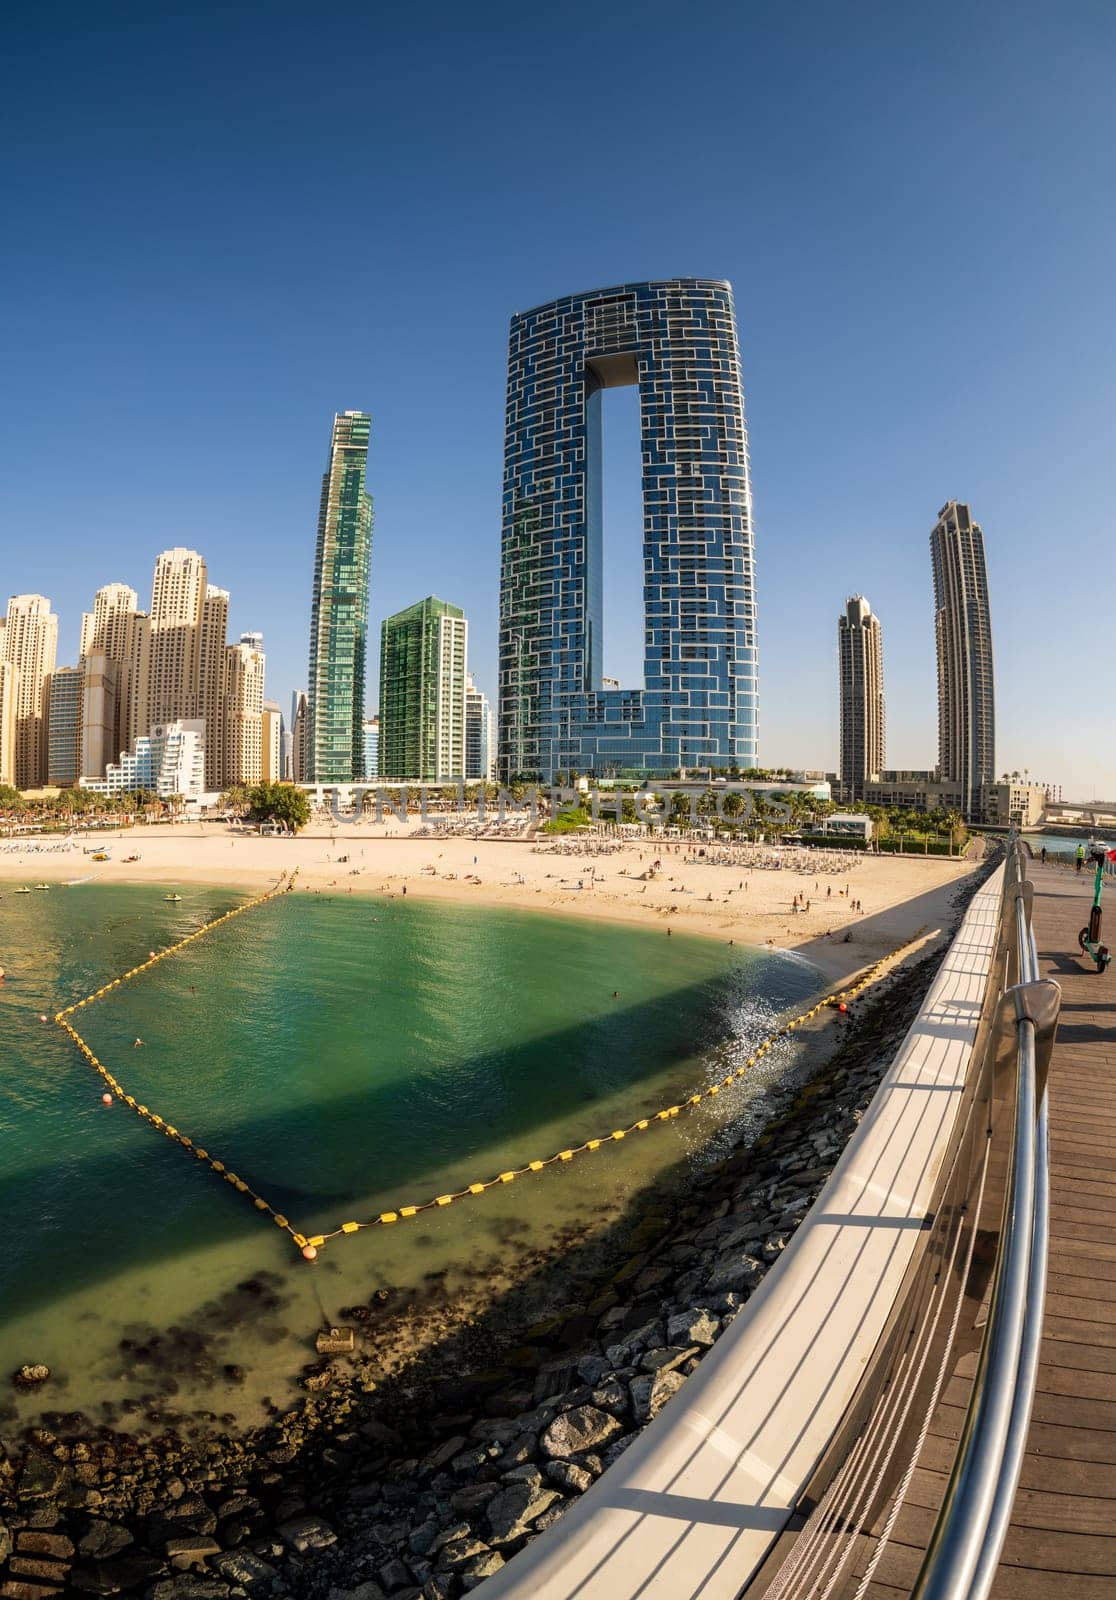 Fisheye of hotels and apartments in JBR Beach from Bluewaters island by steheap